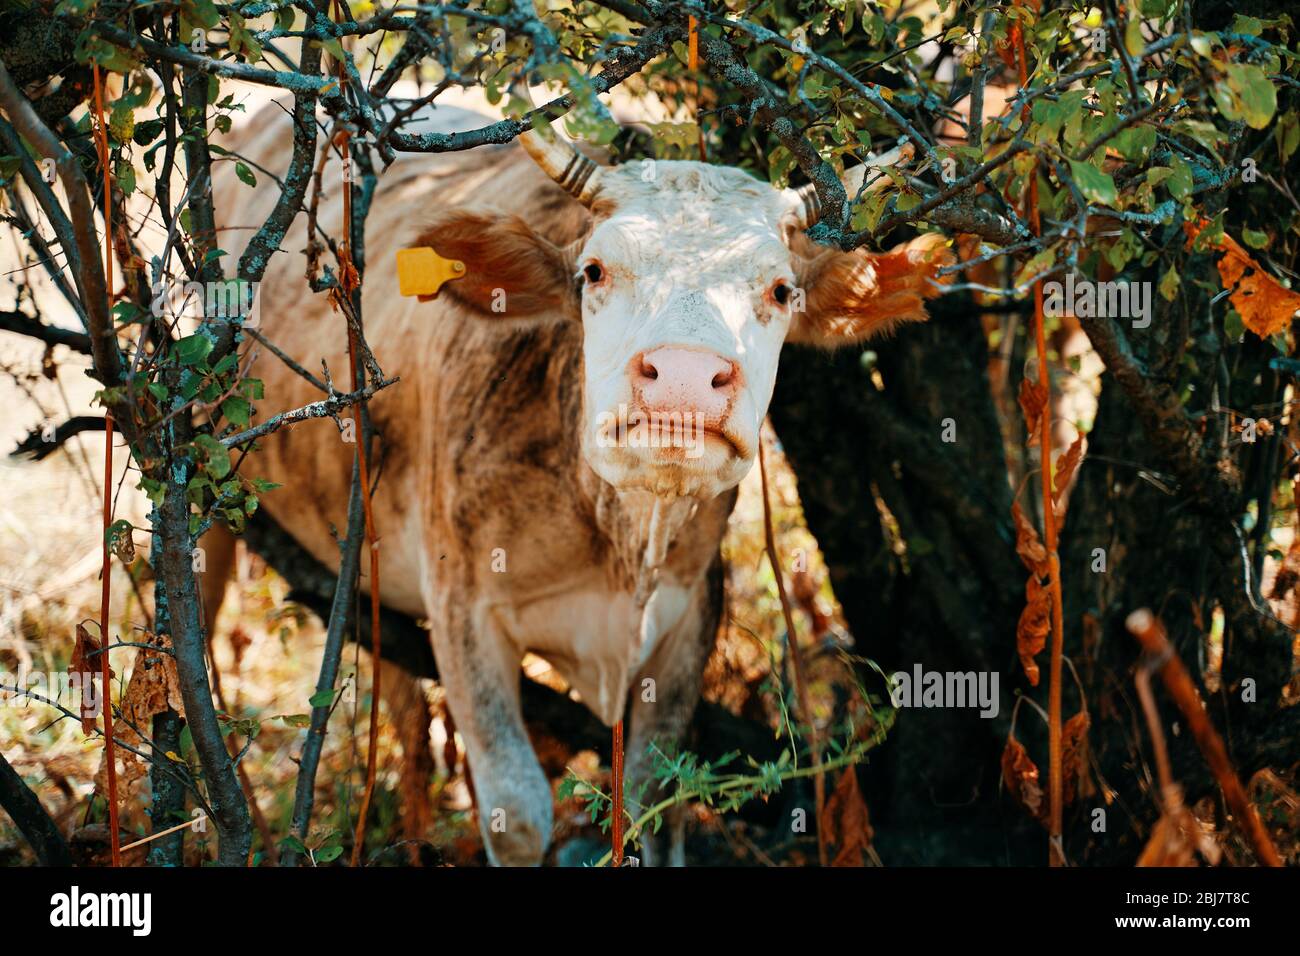 Cow with ear tags stuck in the trees. Stock Photo